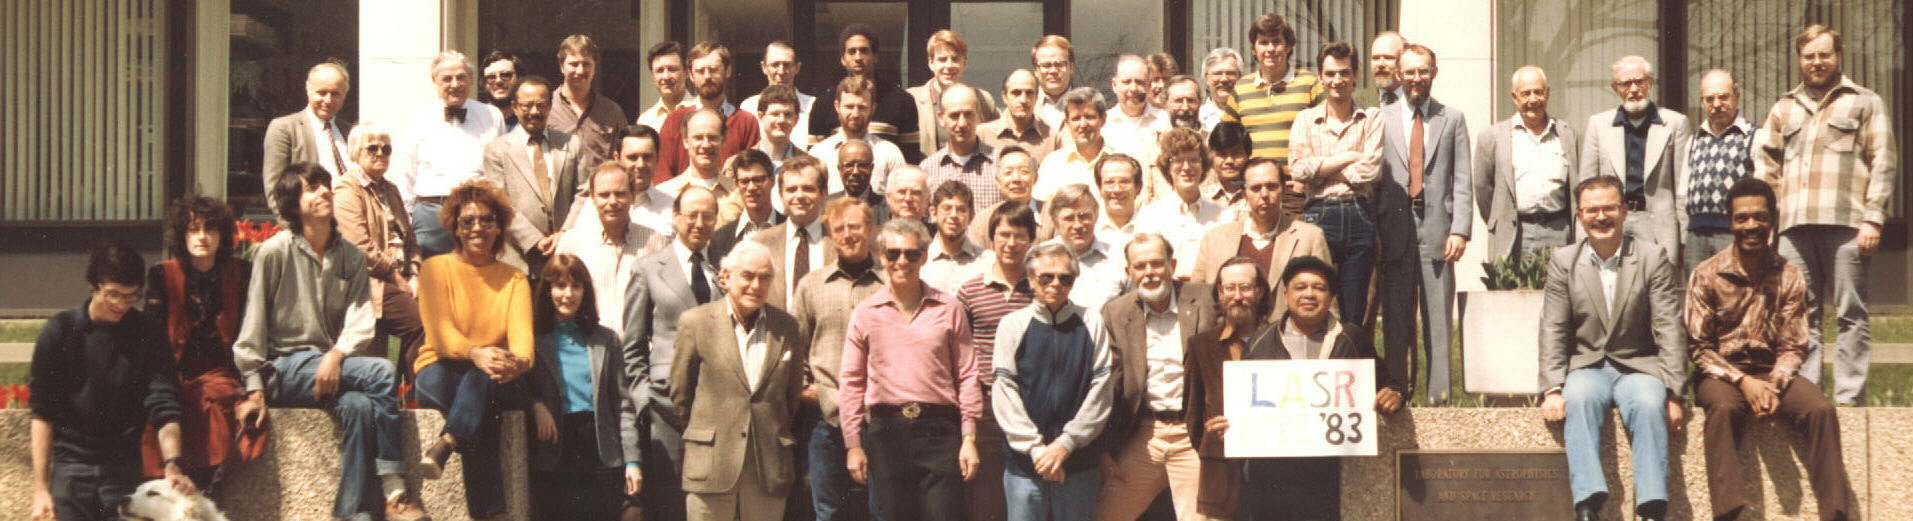 LASR 1983 staff picture. Click for printable version with legend.